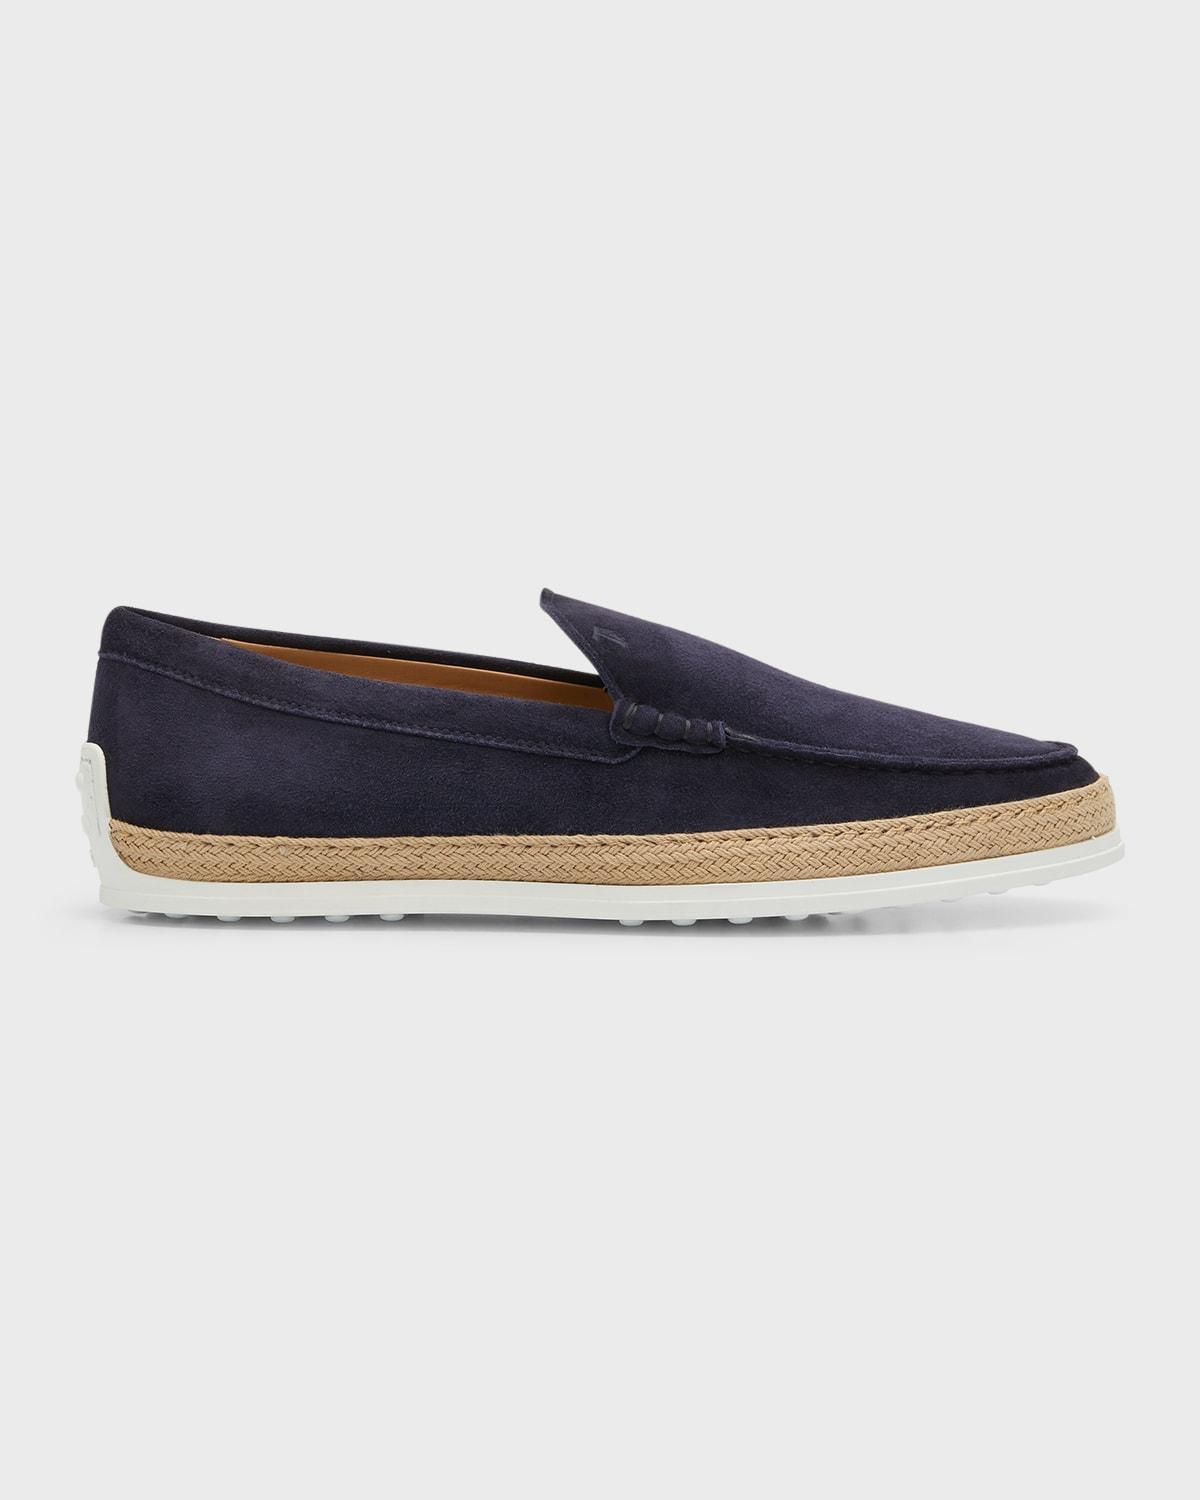 Tods Pantofola Slip-On Sneaker Product Image